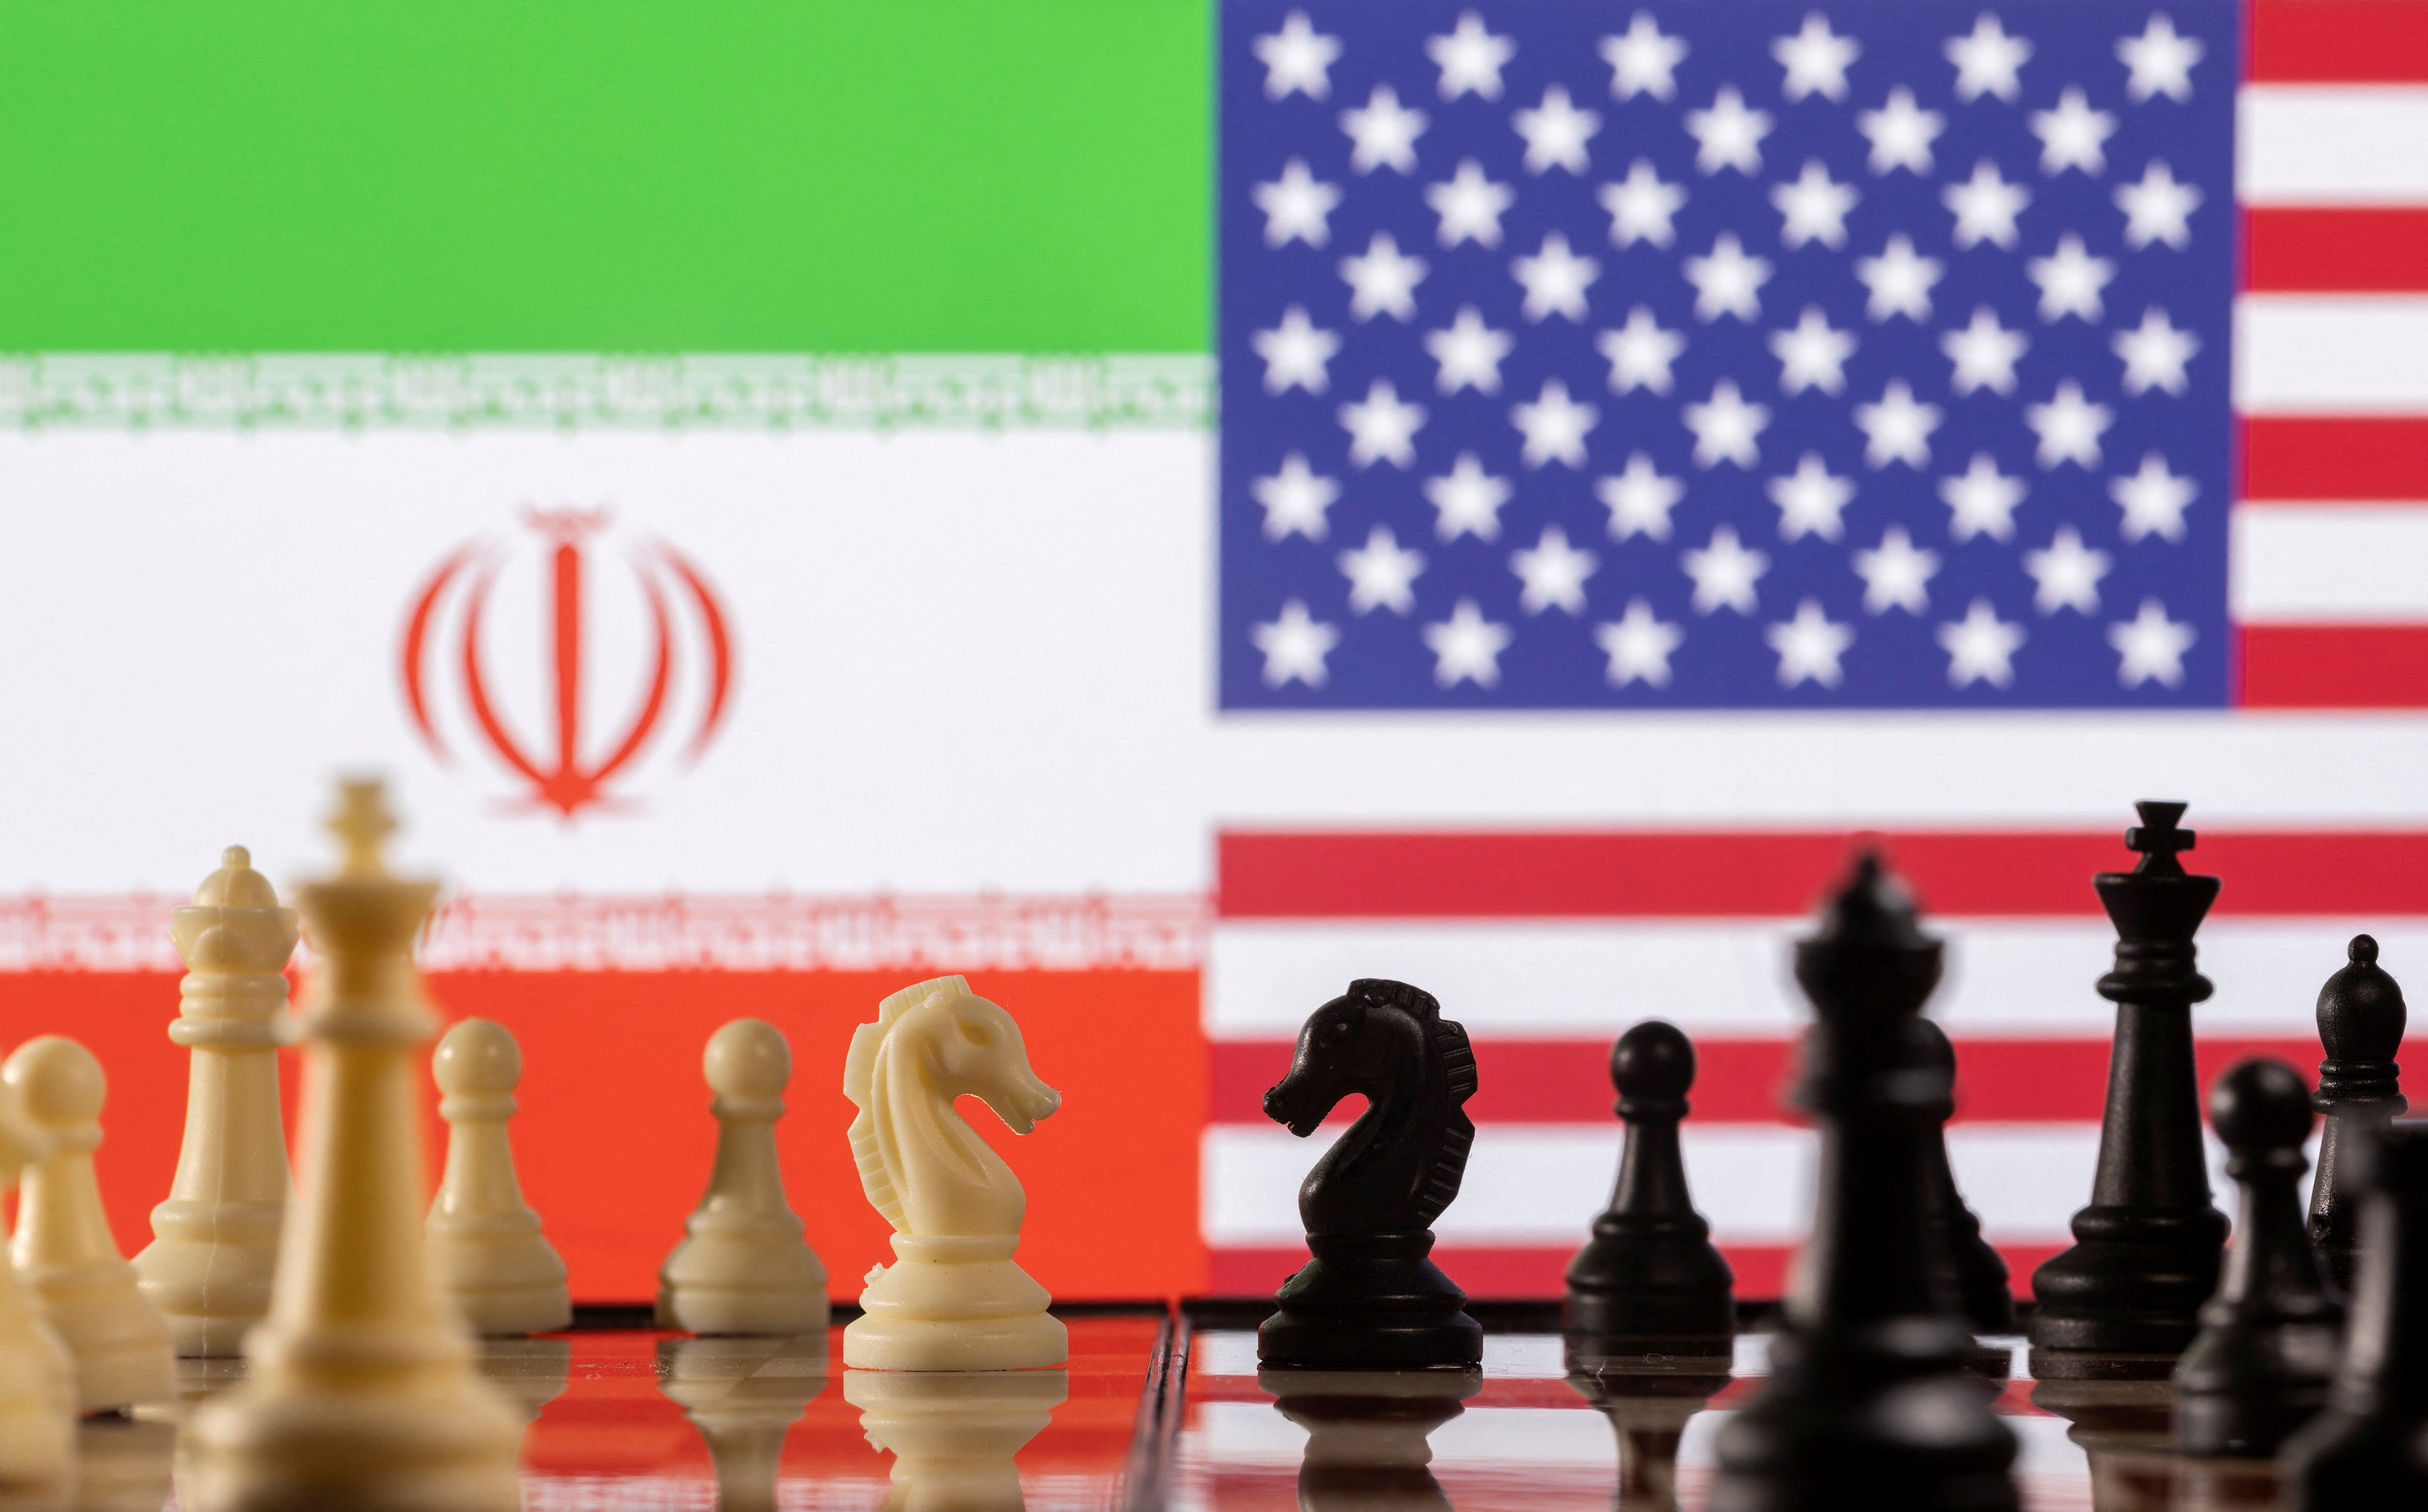 Illustration shows Iran's and U.S. flags